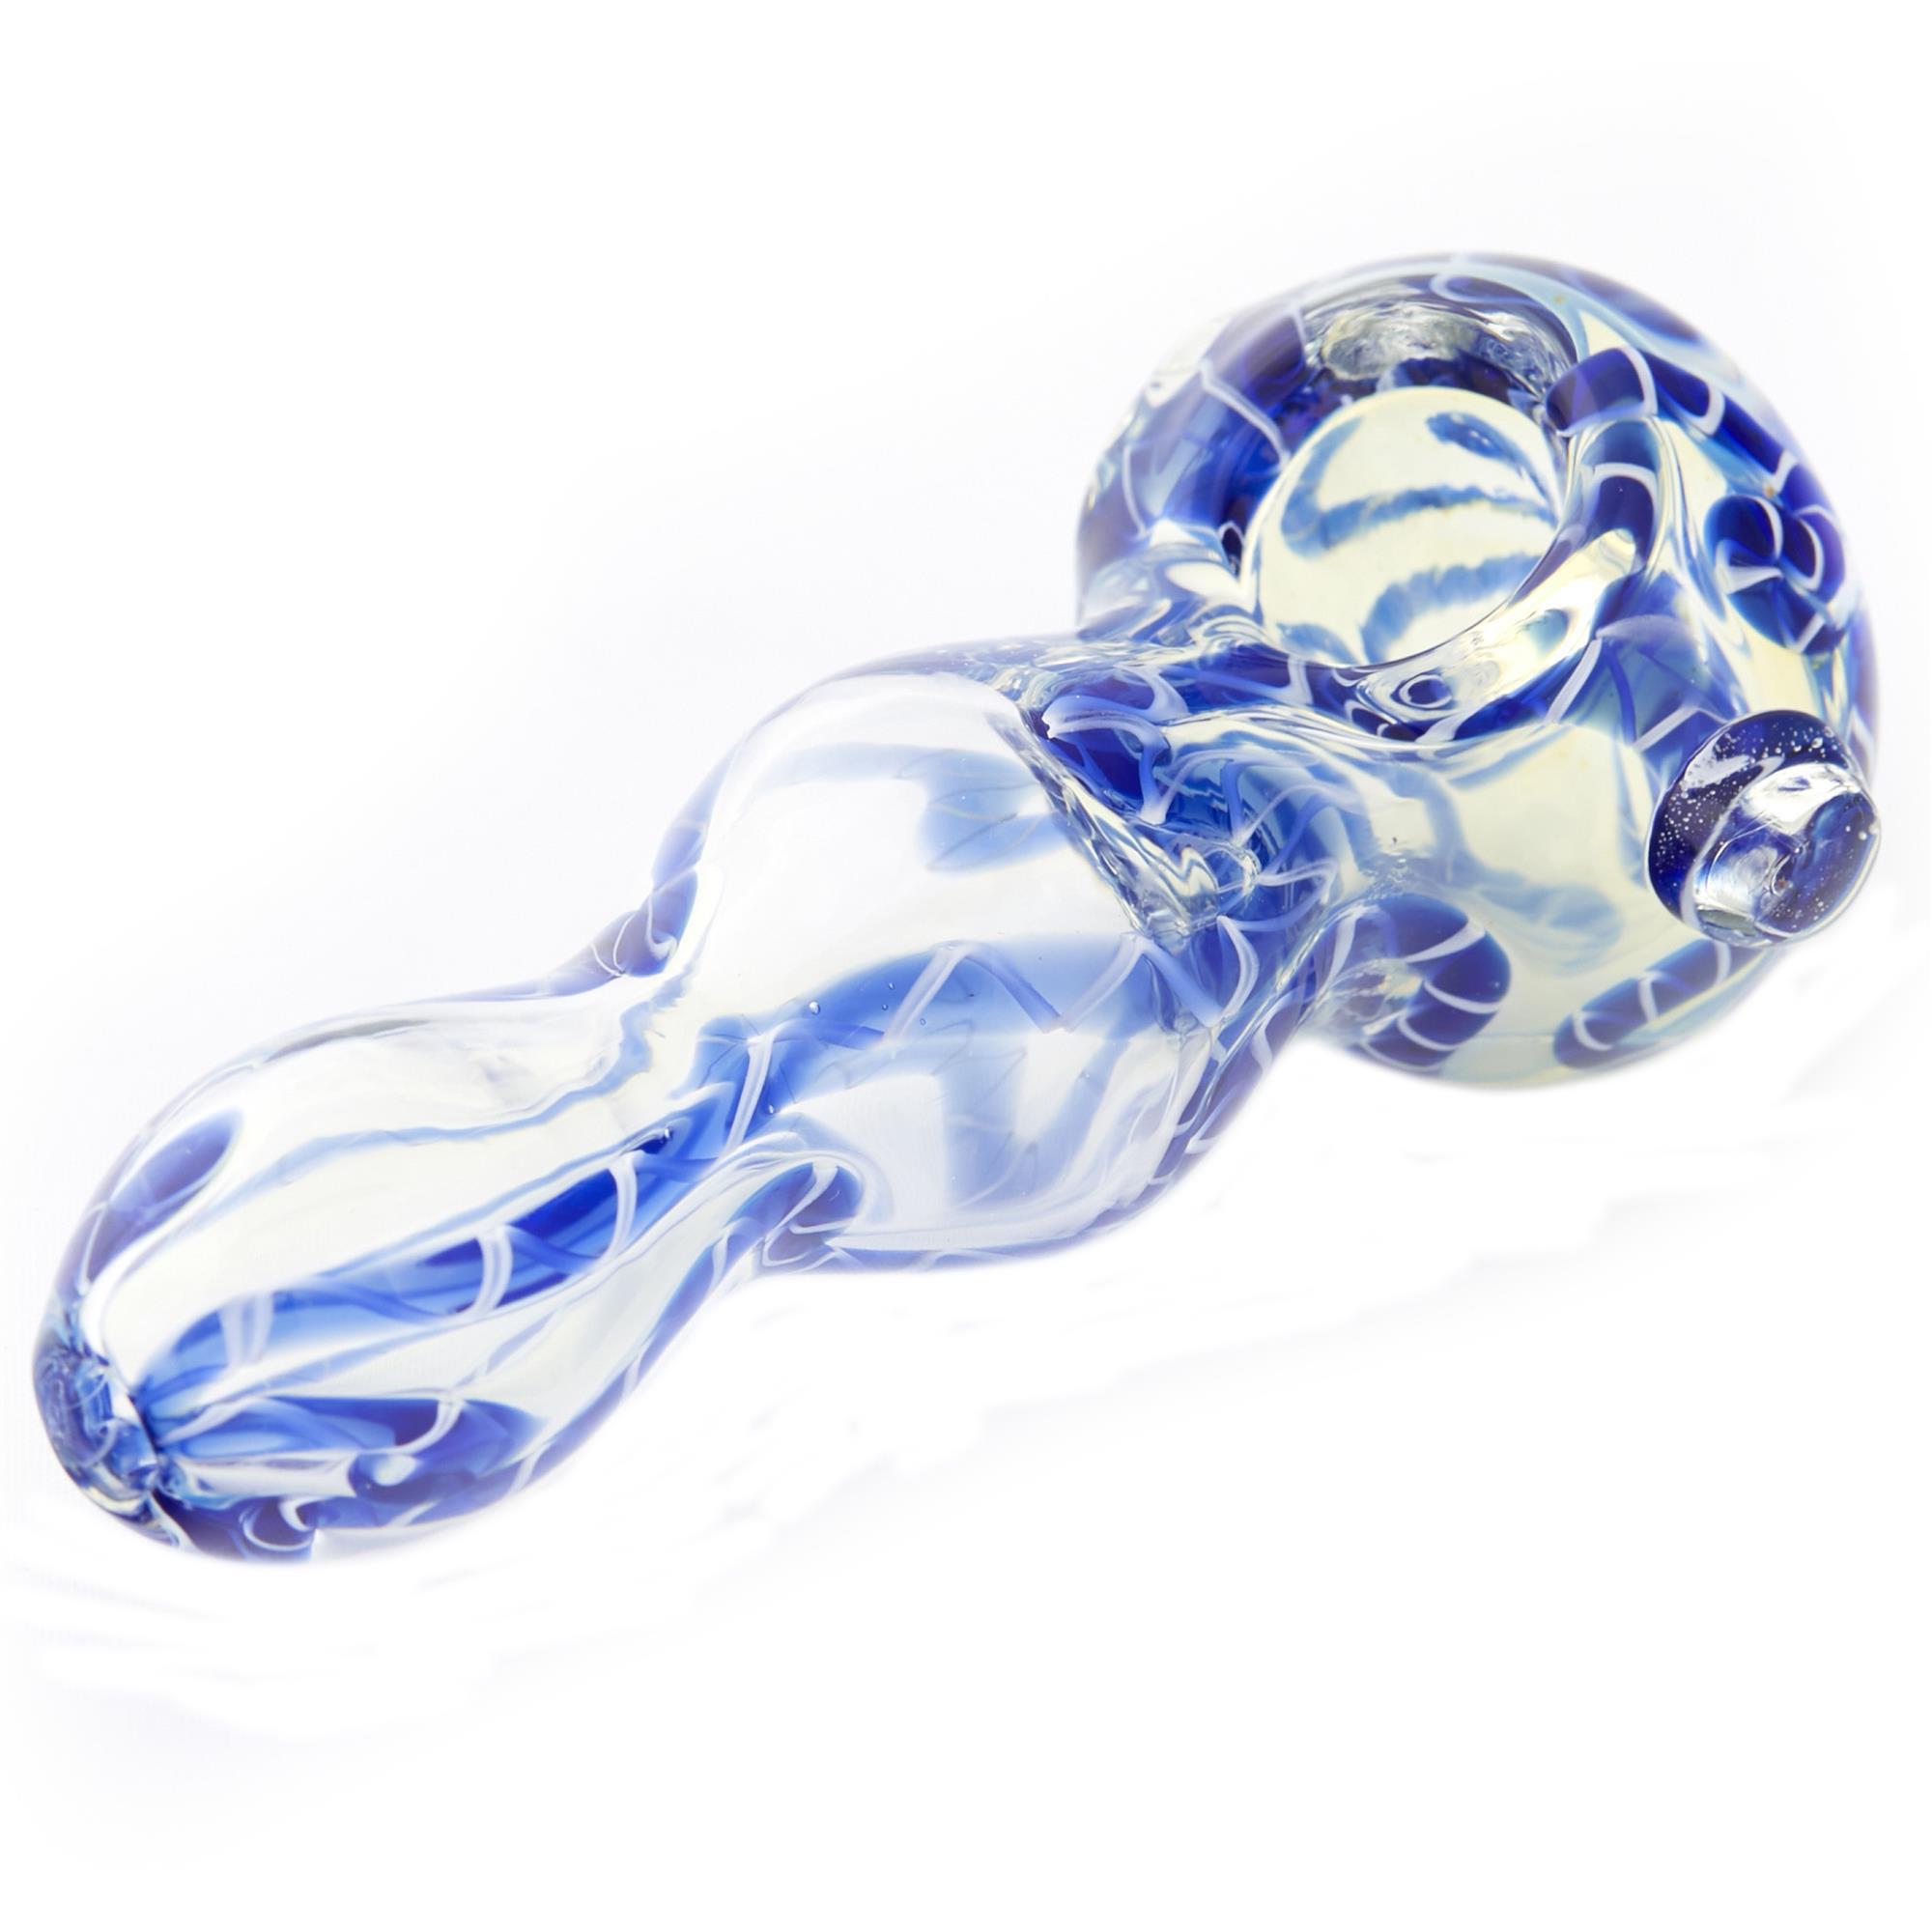 COOL SPOON PIPE